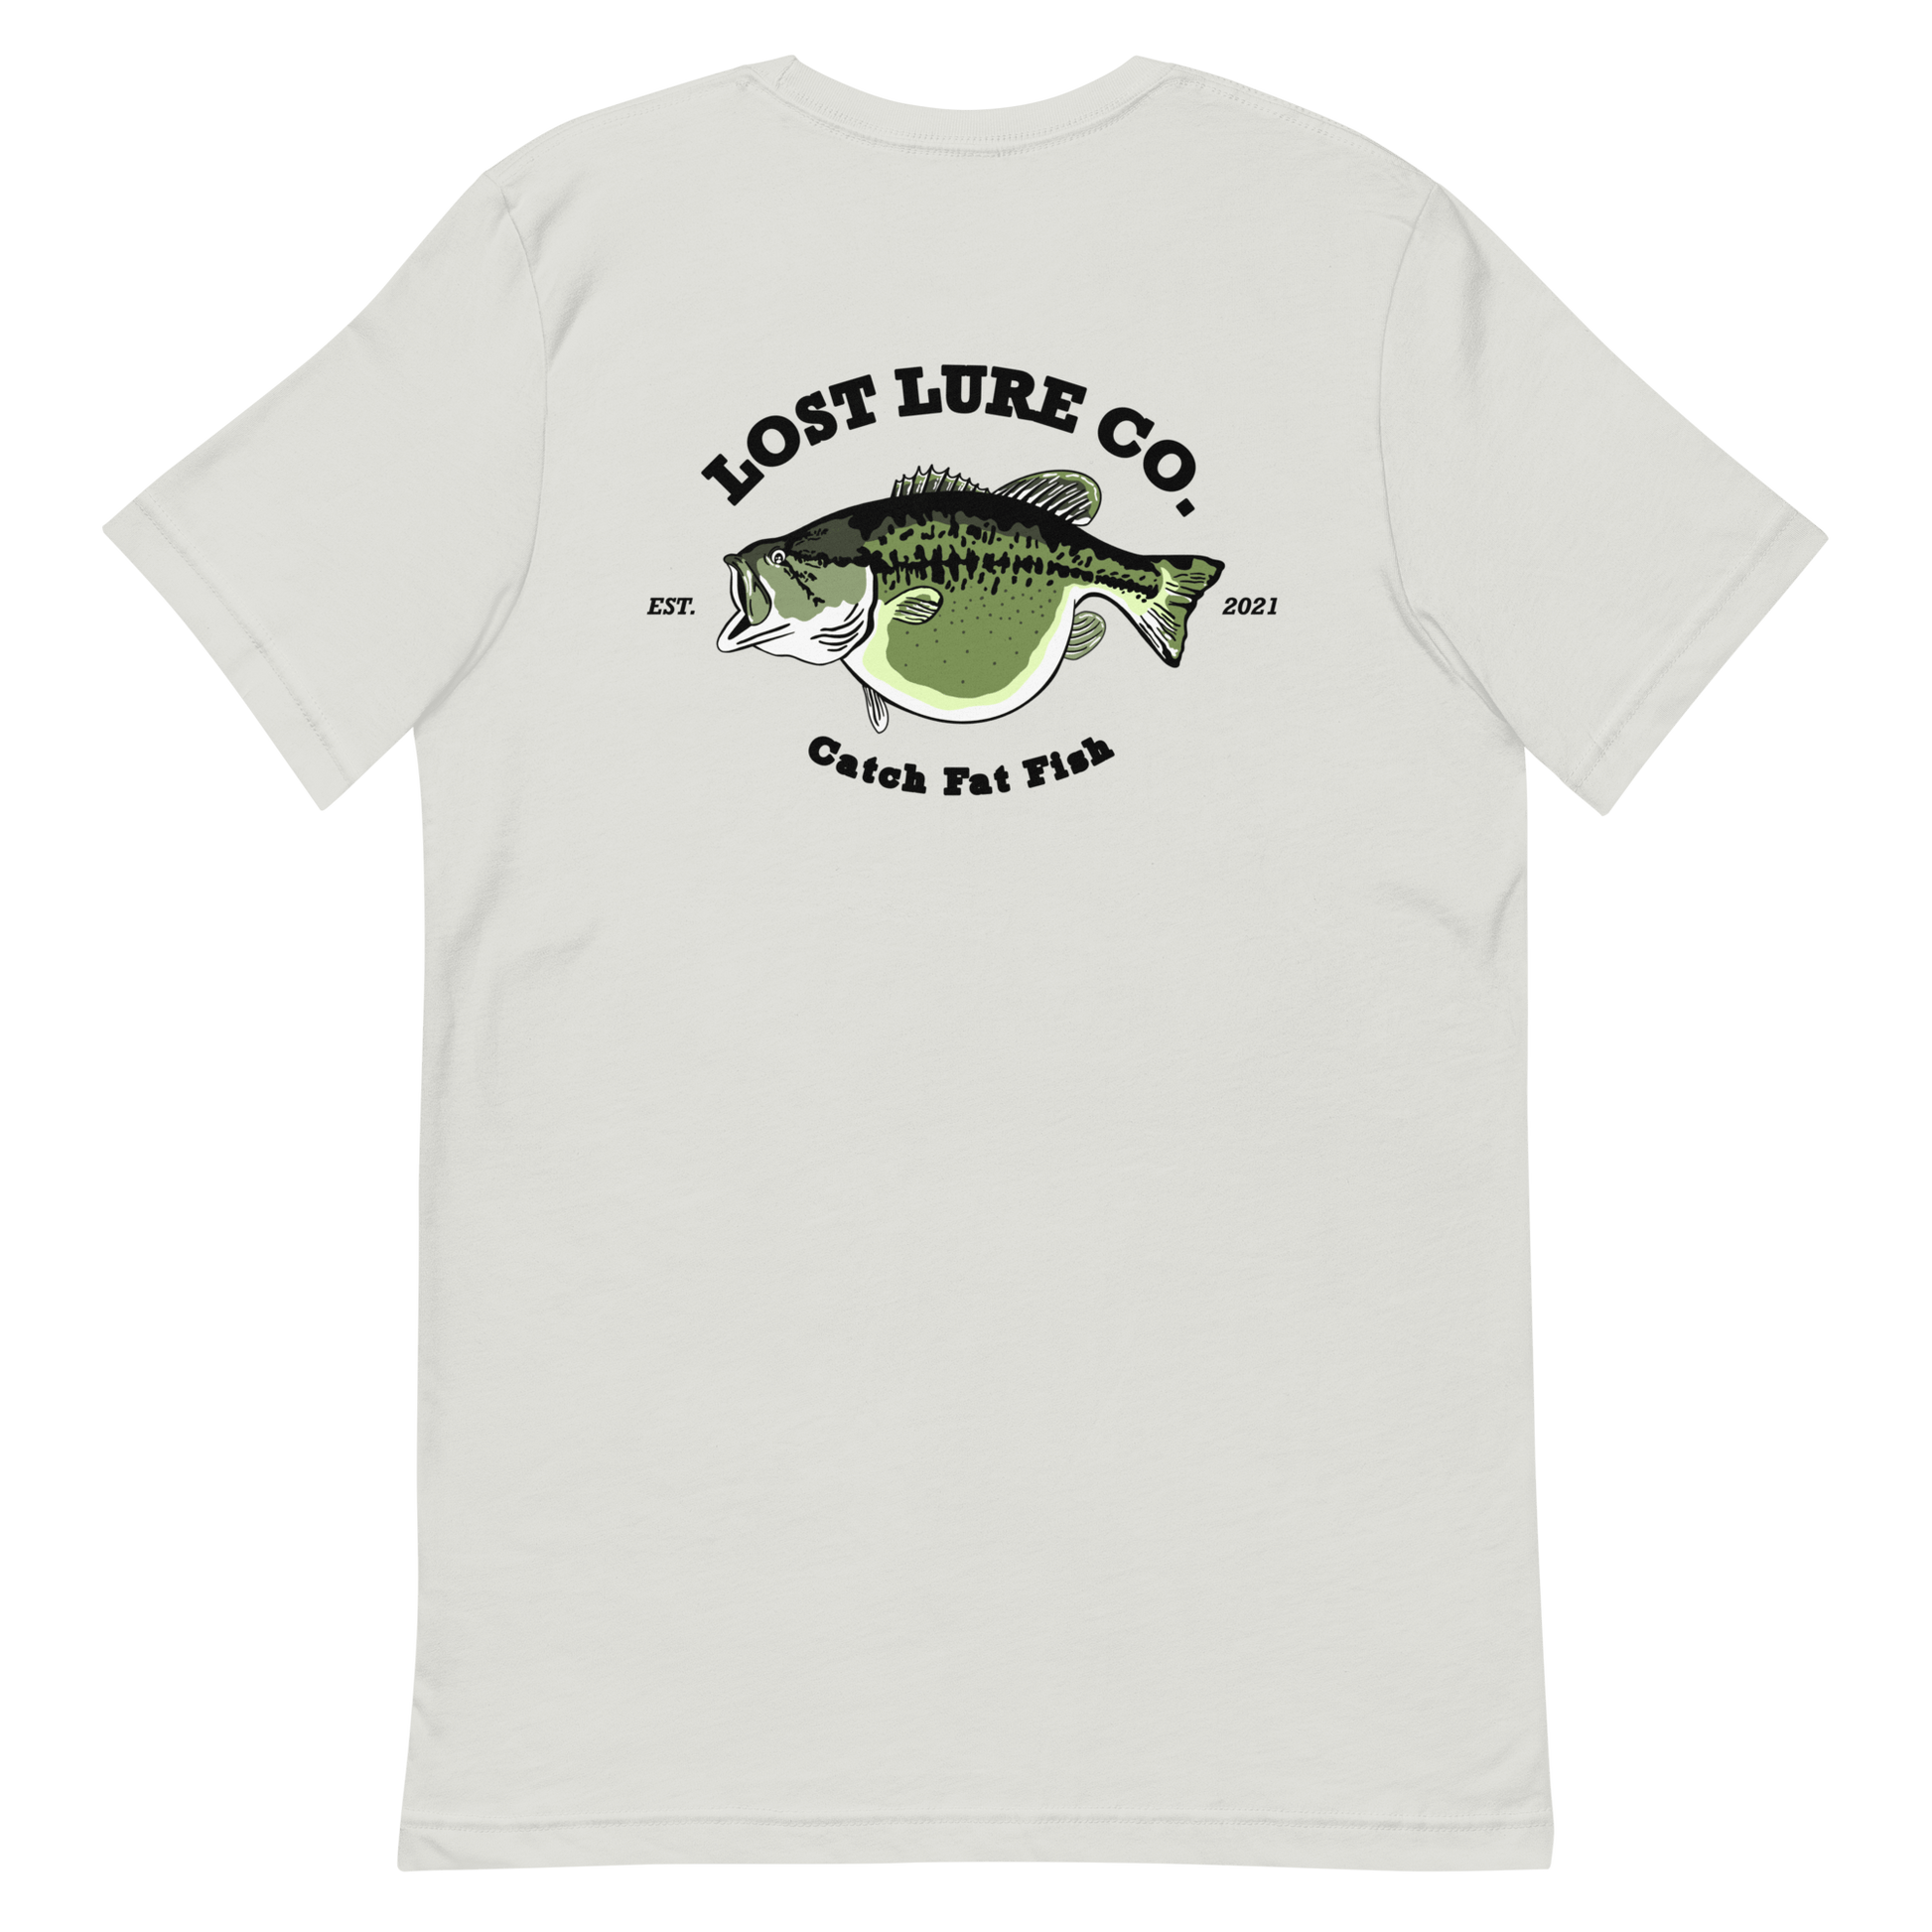 Bass fishing shirt. It has a drawing of a fat bass and it reads “lost lure co, catch fat fish”. The bass design is on the back, the lost lure logo is on the front. Silver colored shirt, back side 